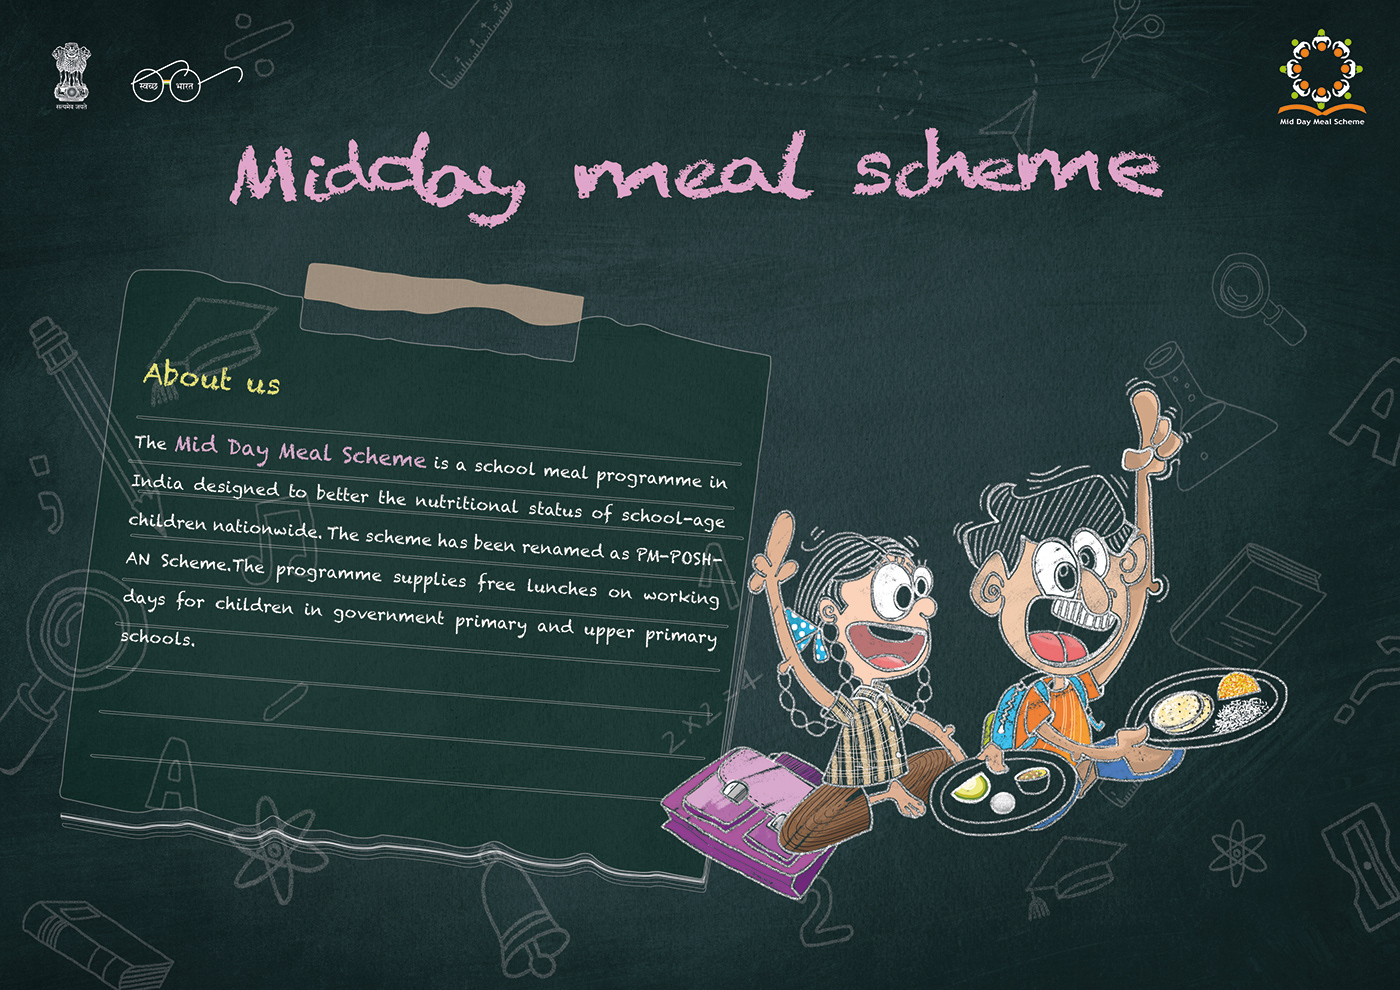 Awareness campaign social campaign campaign Education nutrition ILLUSTRATION  promote lunch school Government of India